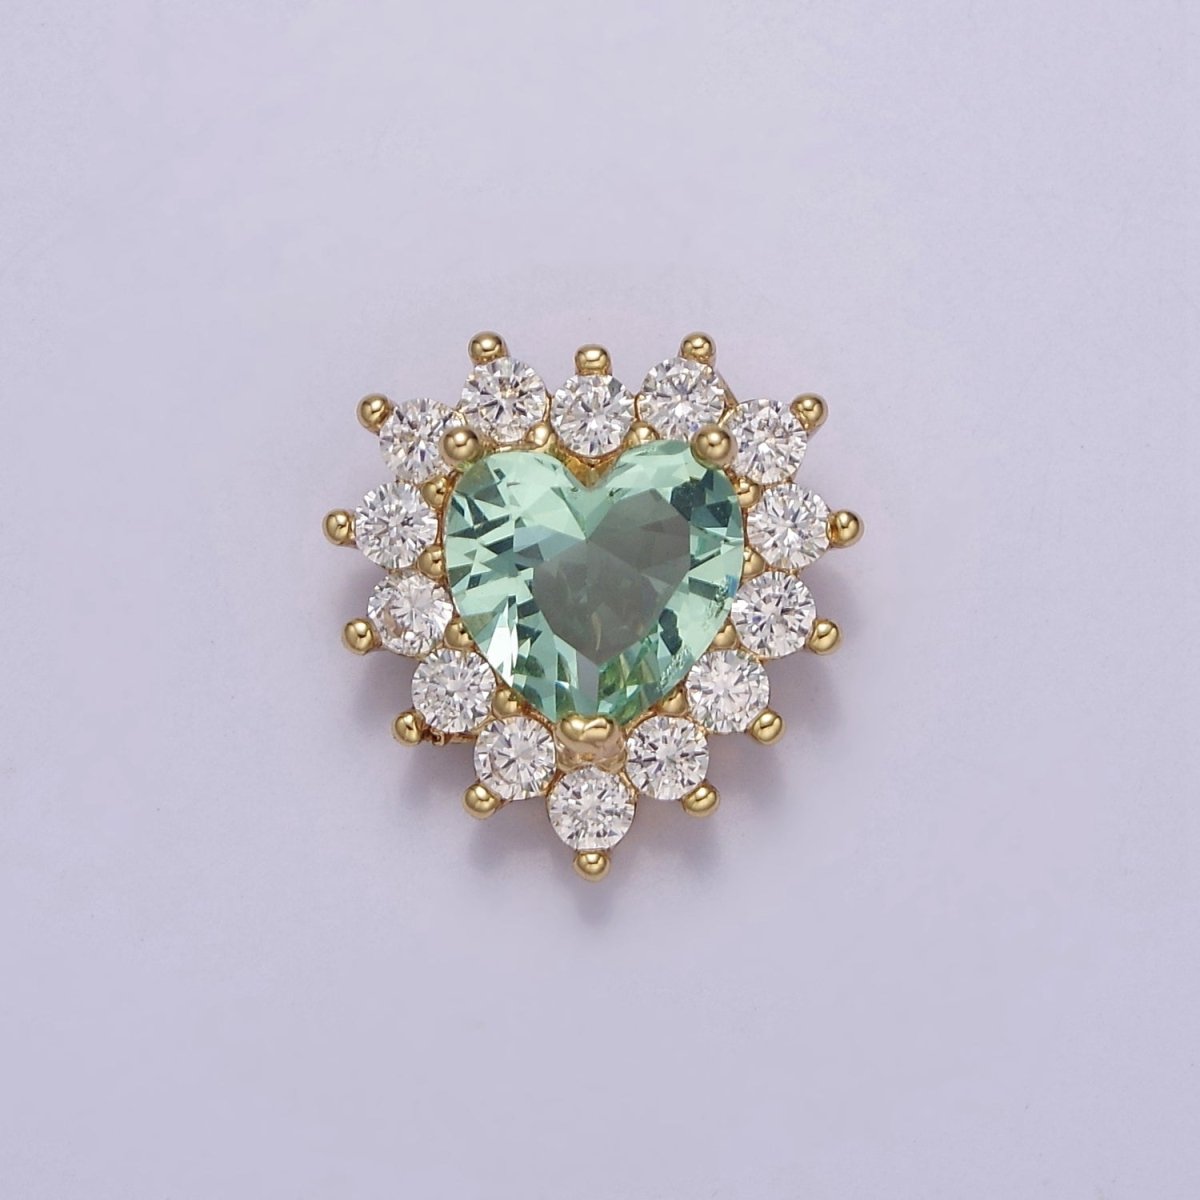 Green Aqua Cubic Zirconia Heart Beads - 14.7 x 14.3 mm Small Beautiful Bright 3D Sun Burst Jewelry Gold Beads spacer for Bracelet Necklace Supply E-418 - DLUXCA